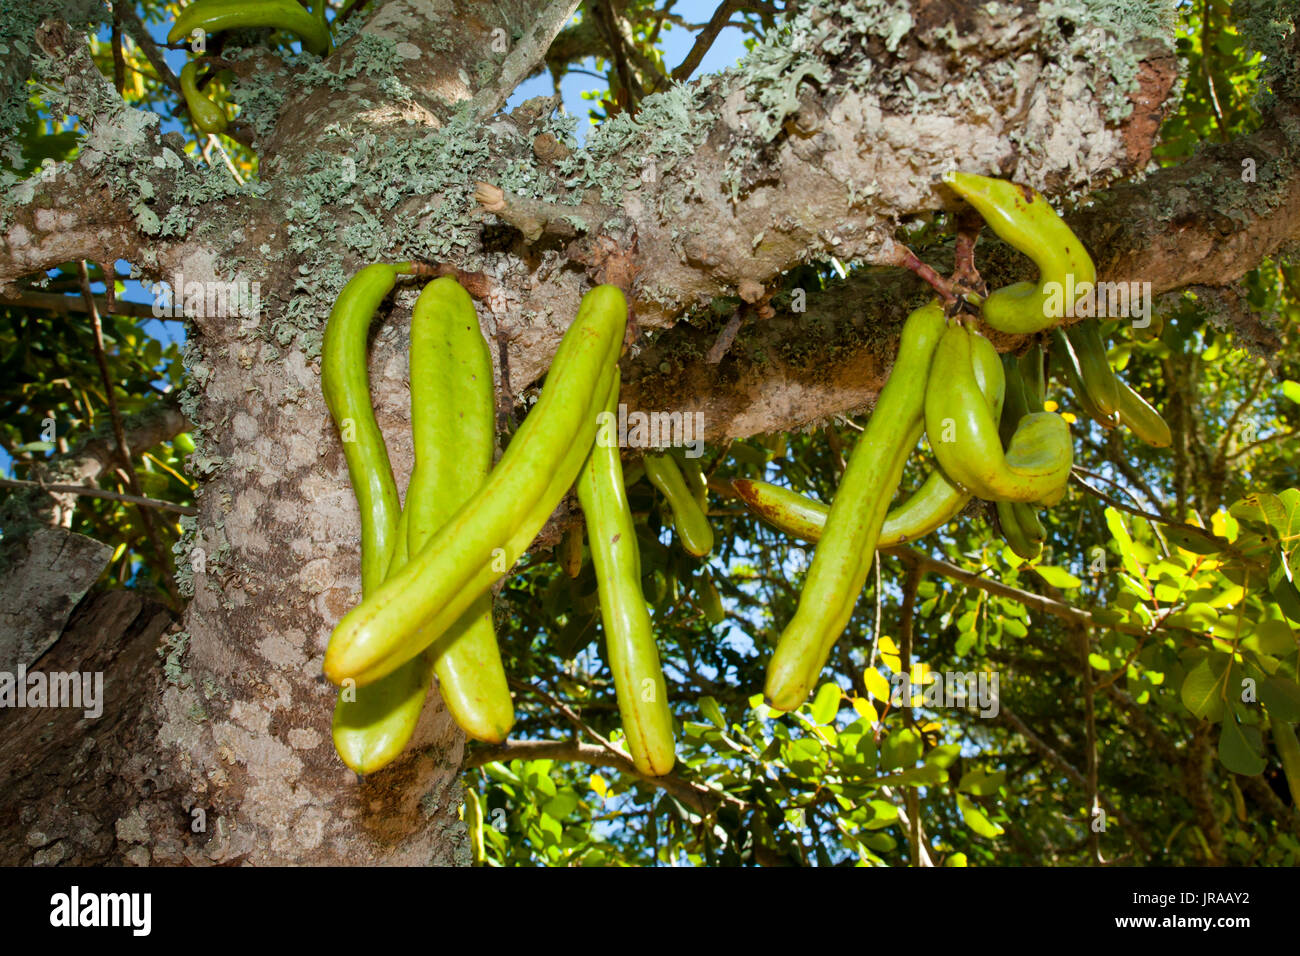 Parmentiera edulis - candle tree green exotic fruit Stock Photo